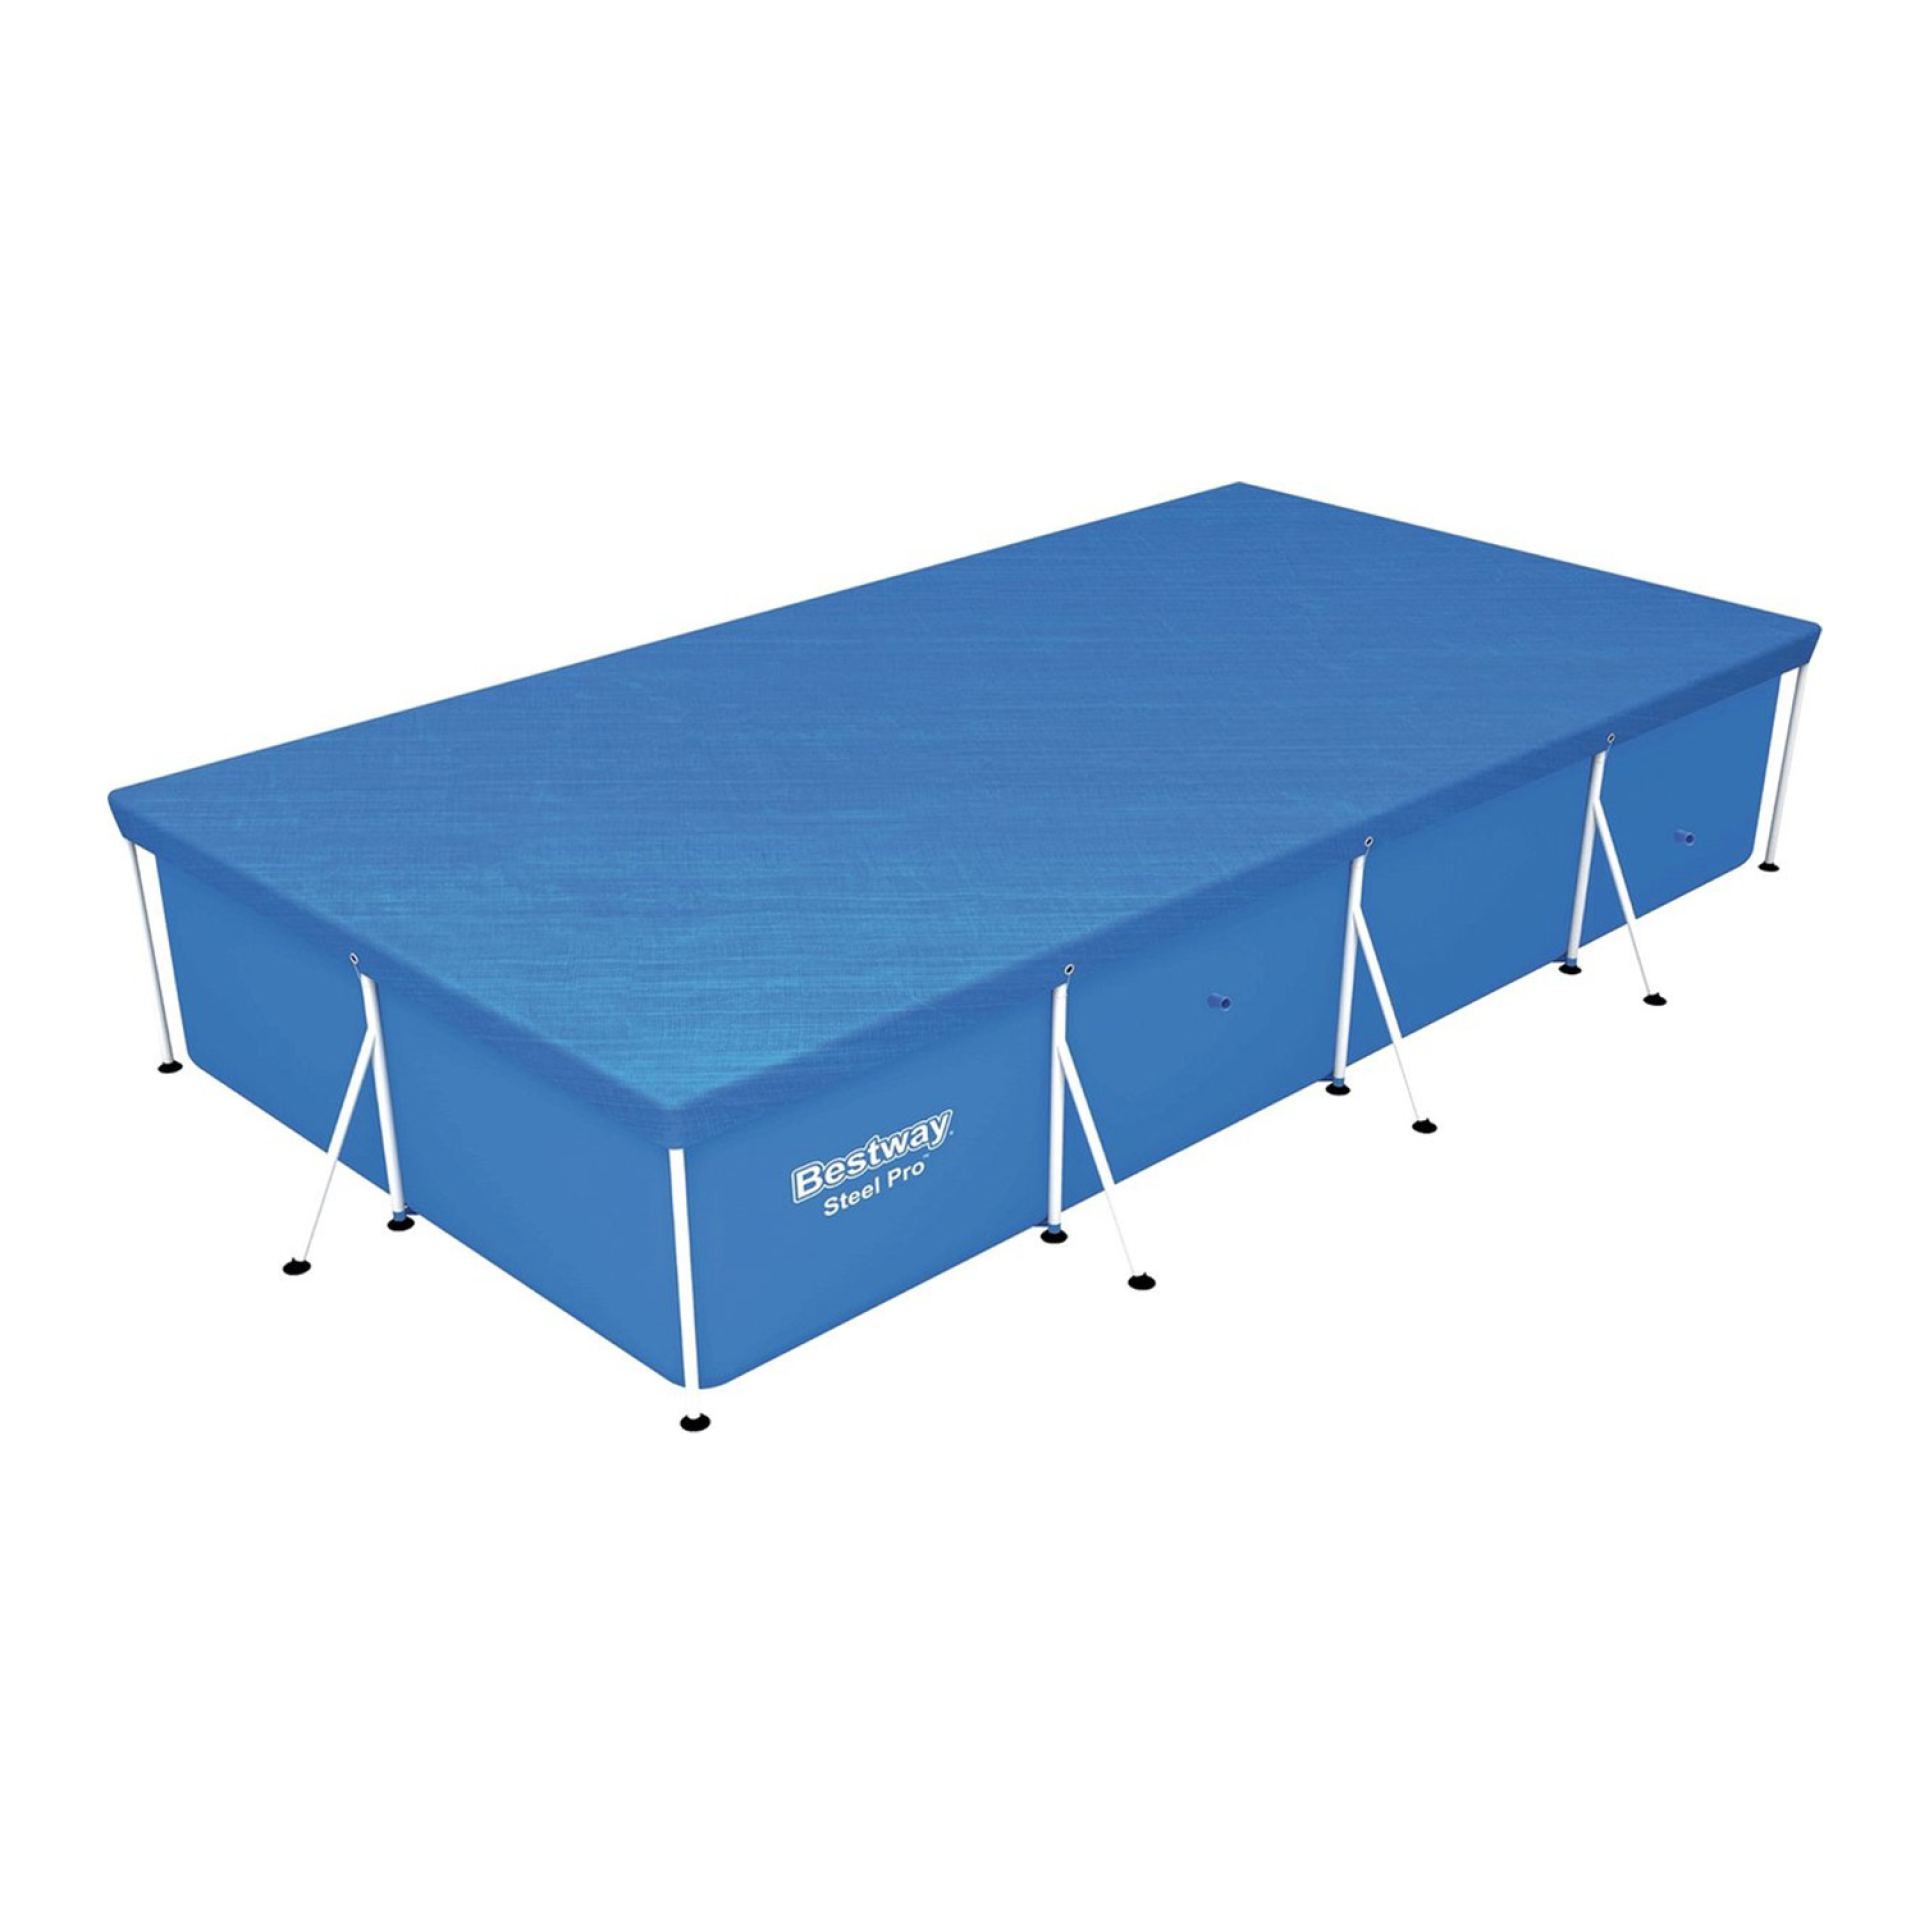 Bestway flowclear zwembad cover 410x226cm